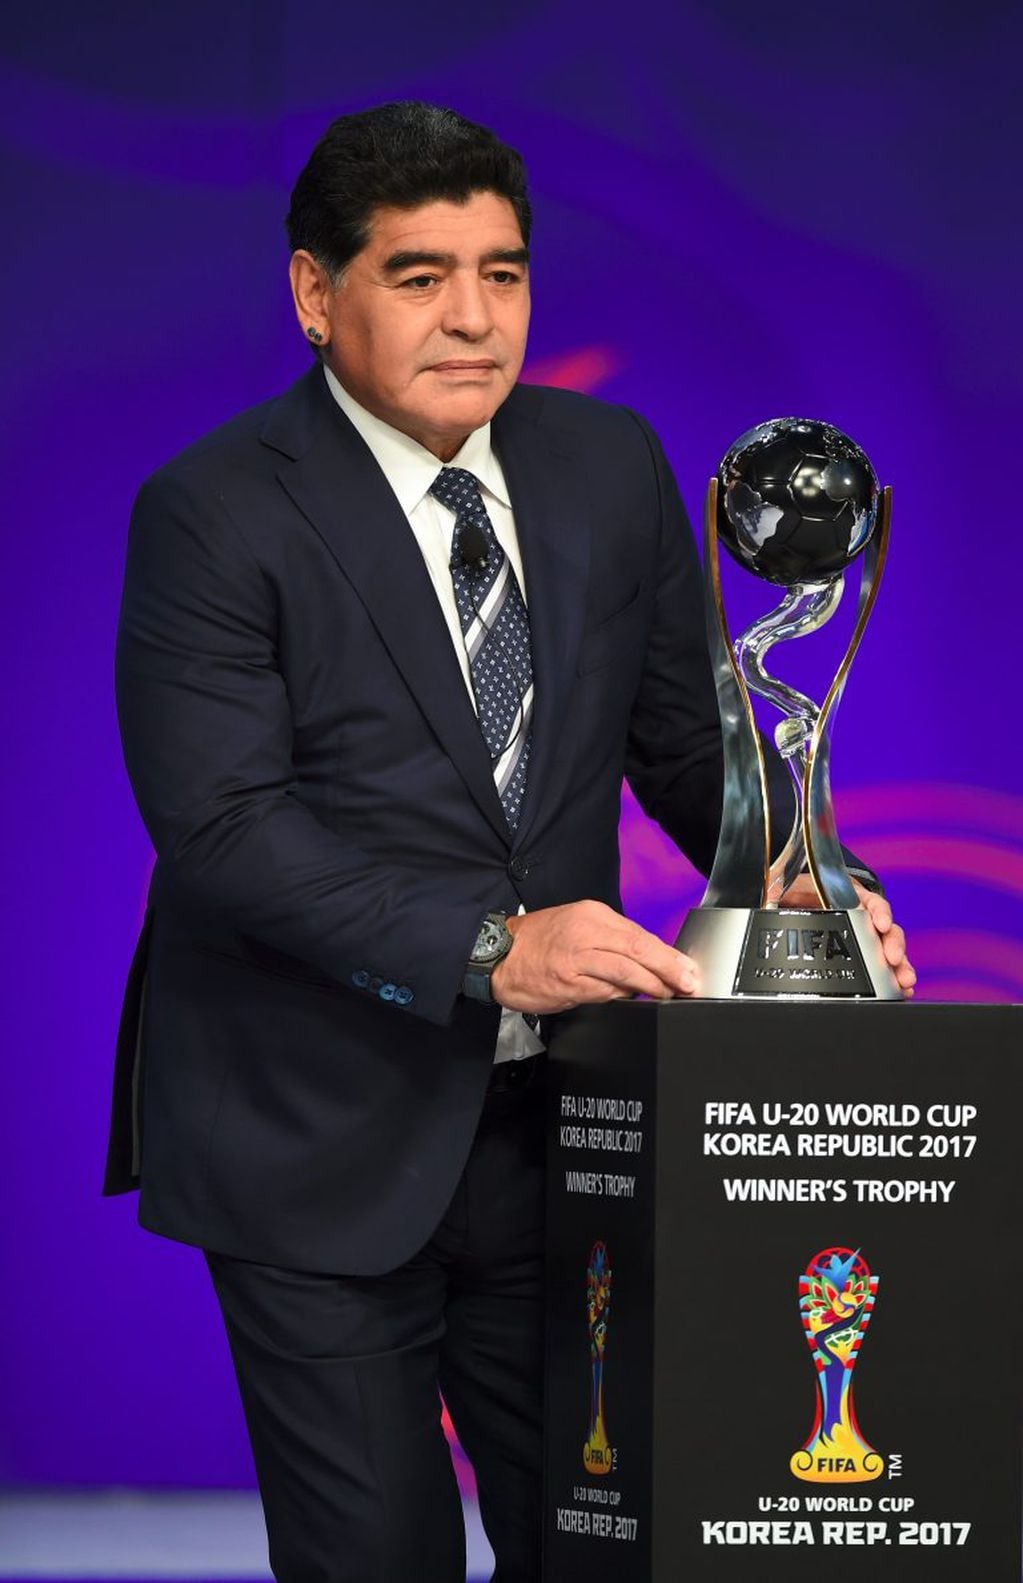 Argentinian football star Diego Maradona puts the trophy on the table during the official draw for the FIFA under-20 football World Cup in Suwon, south of Seoul, on March 15, 2017.
The FIFA U-20 World Cup will be held in South Korea from May 20 to June 11